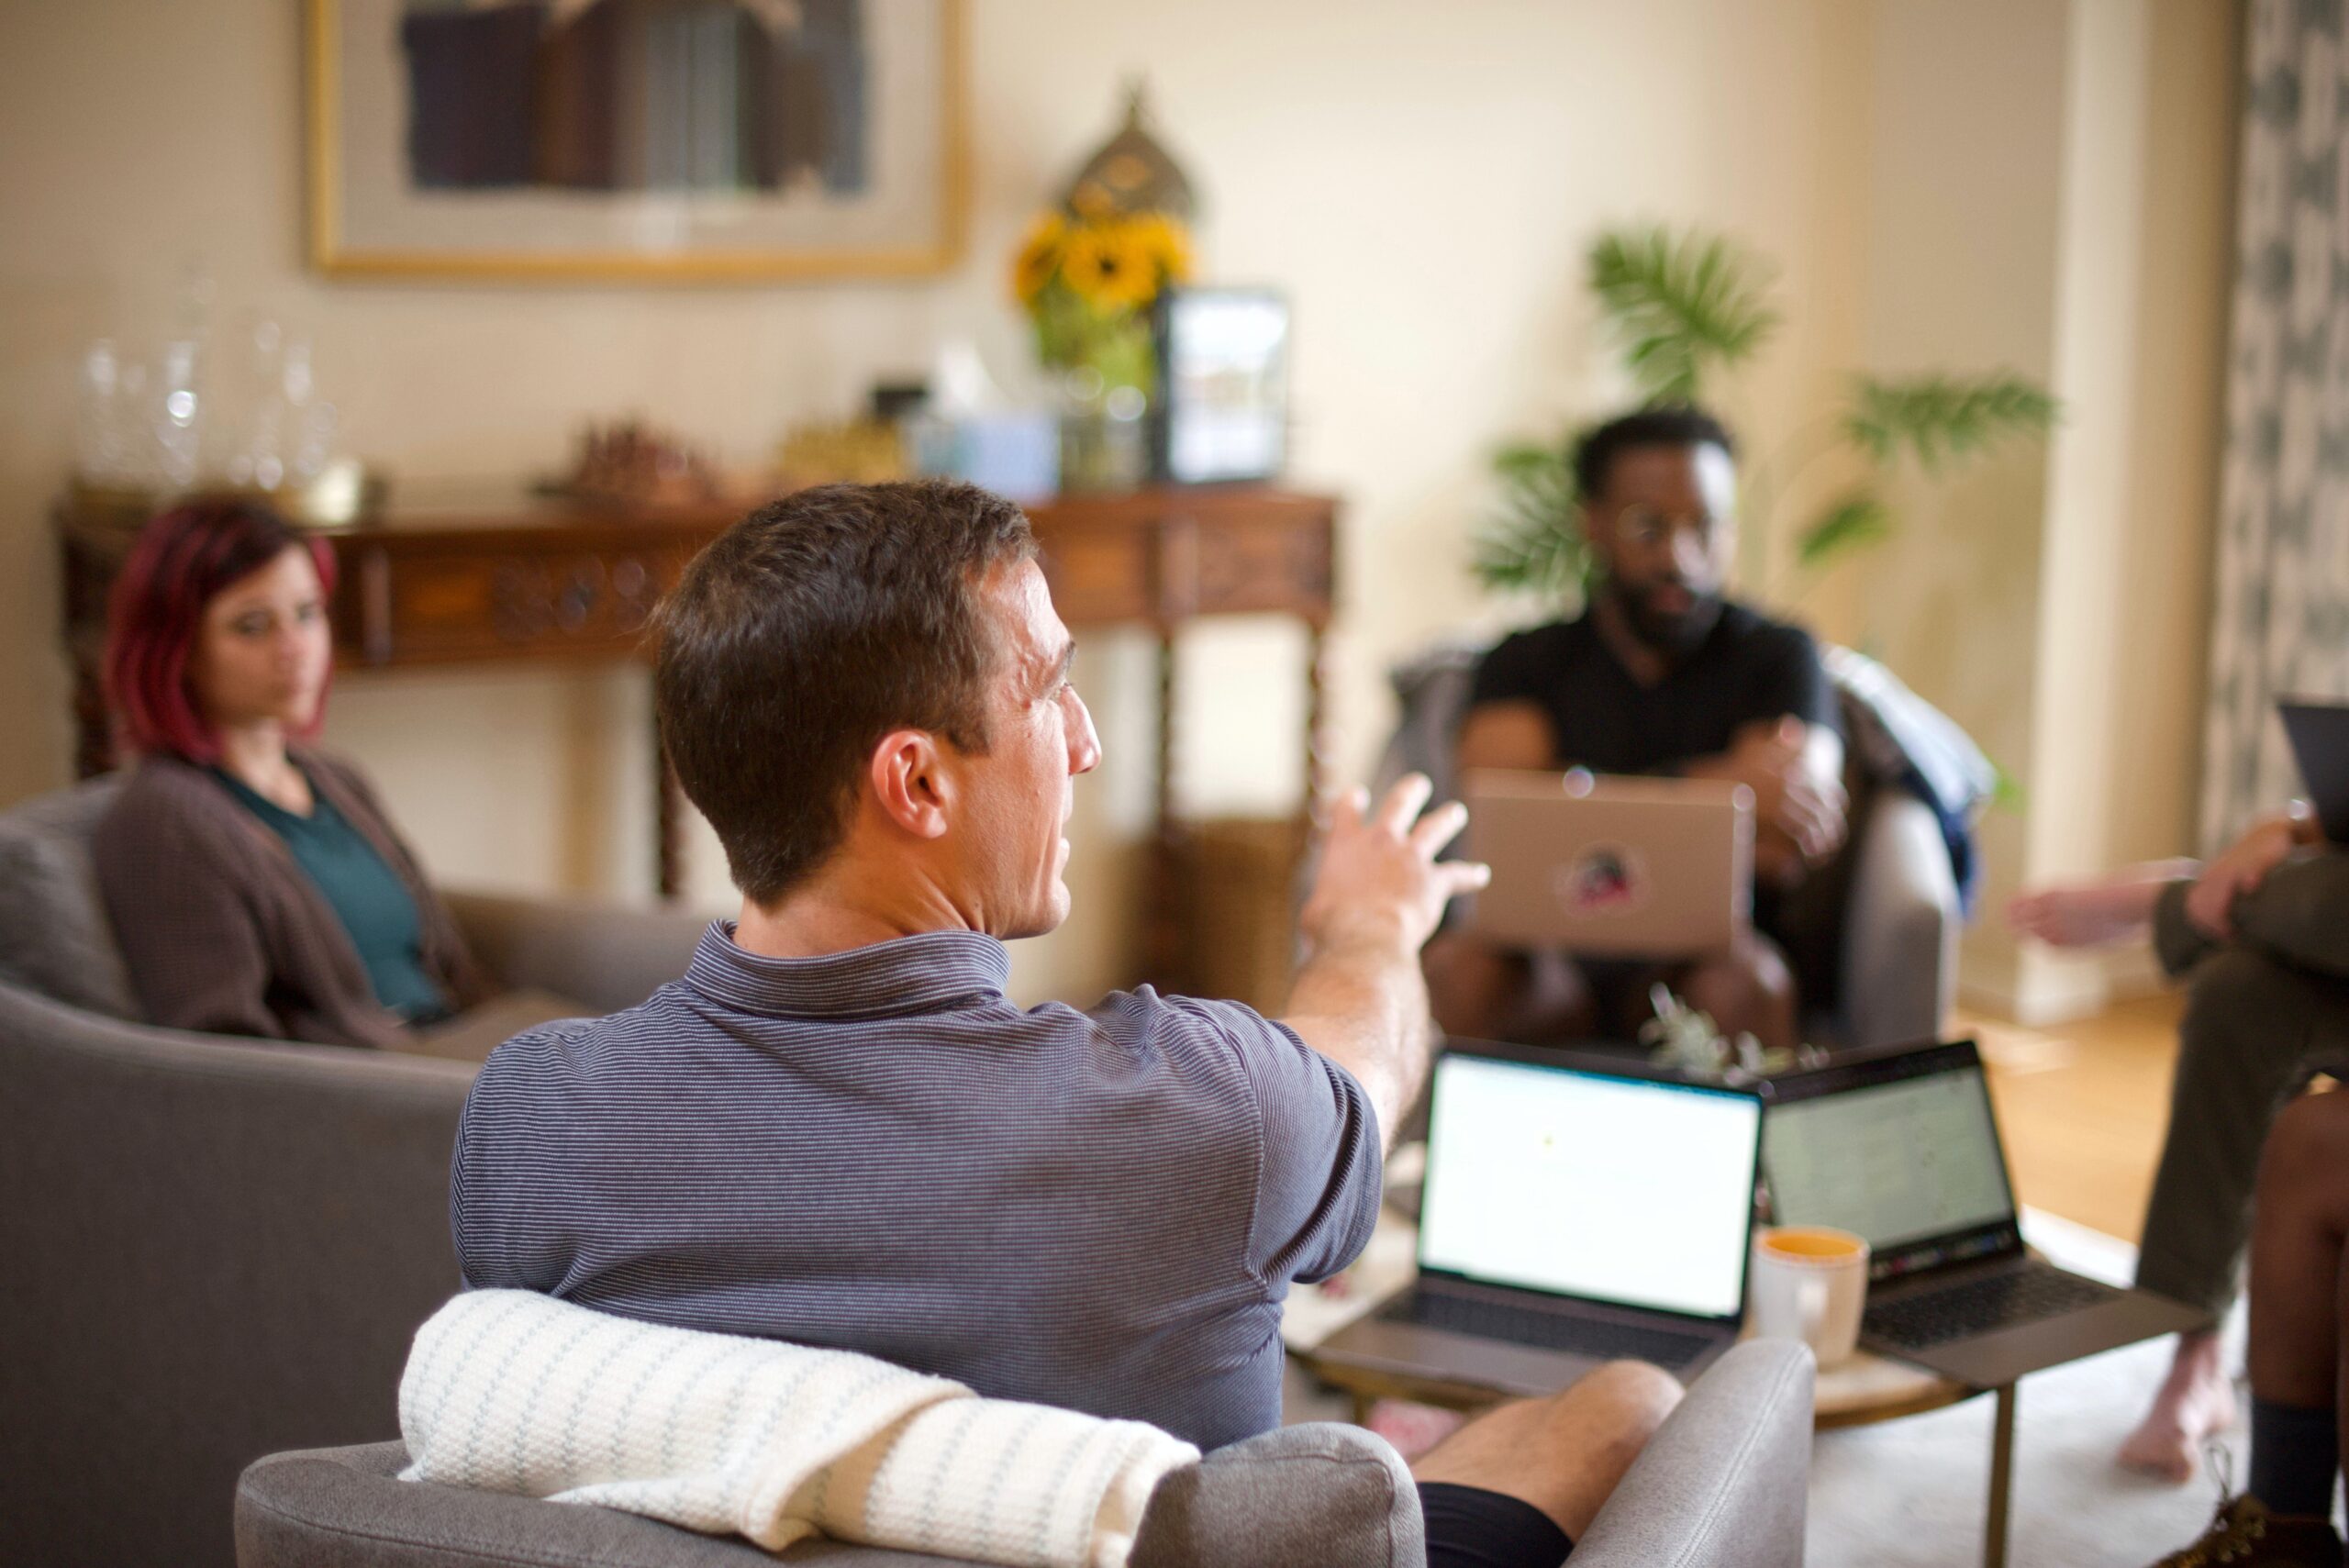 Two men and one woman sit on armchairs with laptops in front of them, in a meeting in a residential lounge